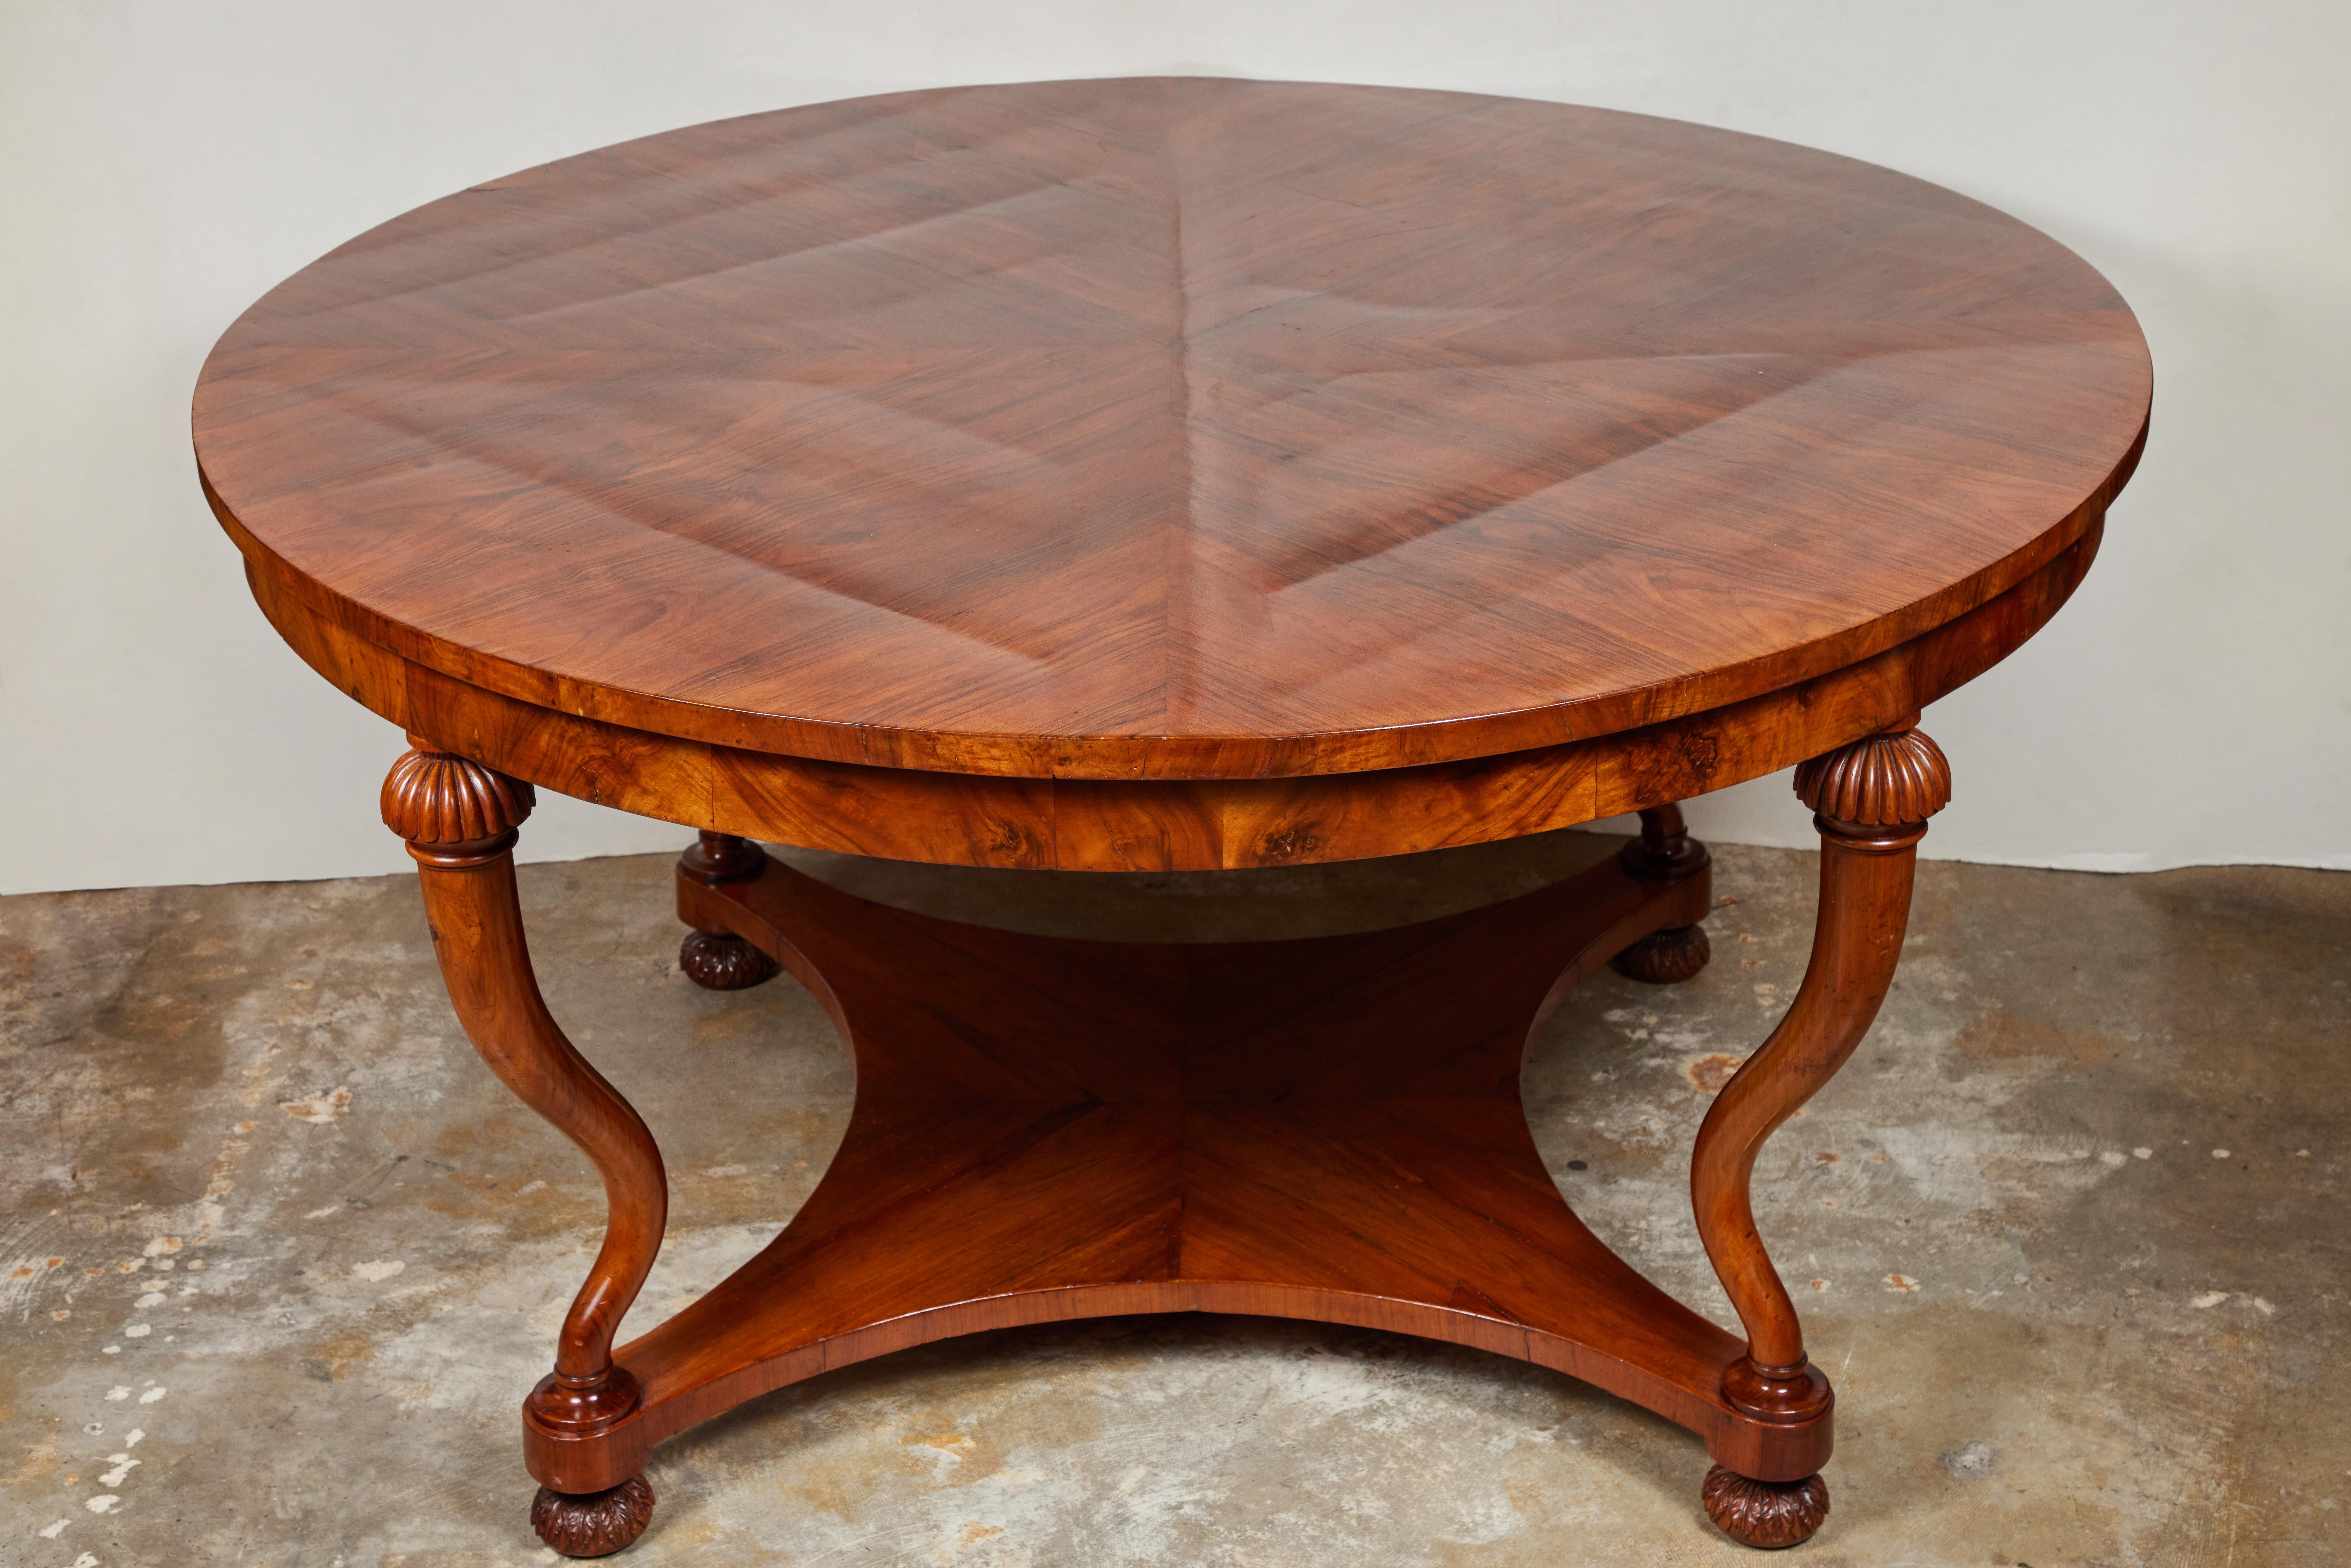 Wood c. 1840, Tuscan Center Table